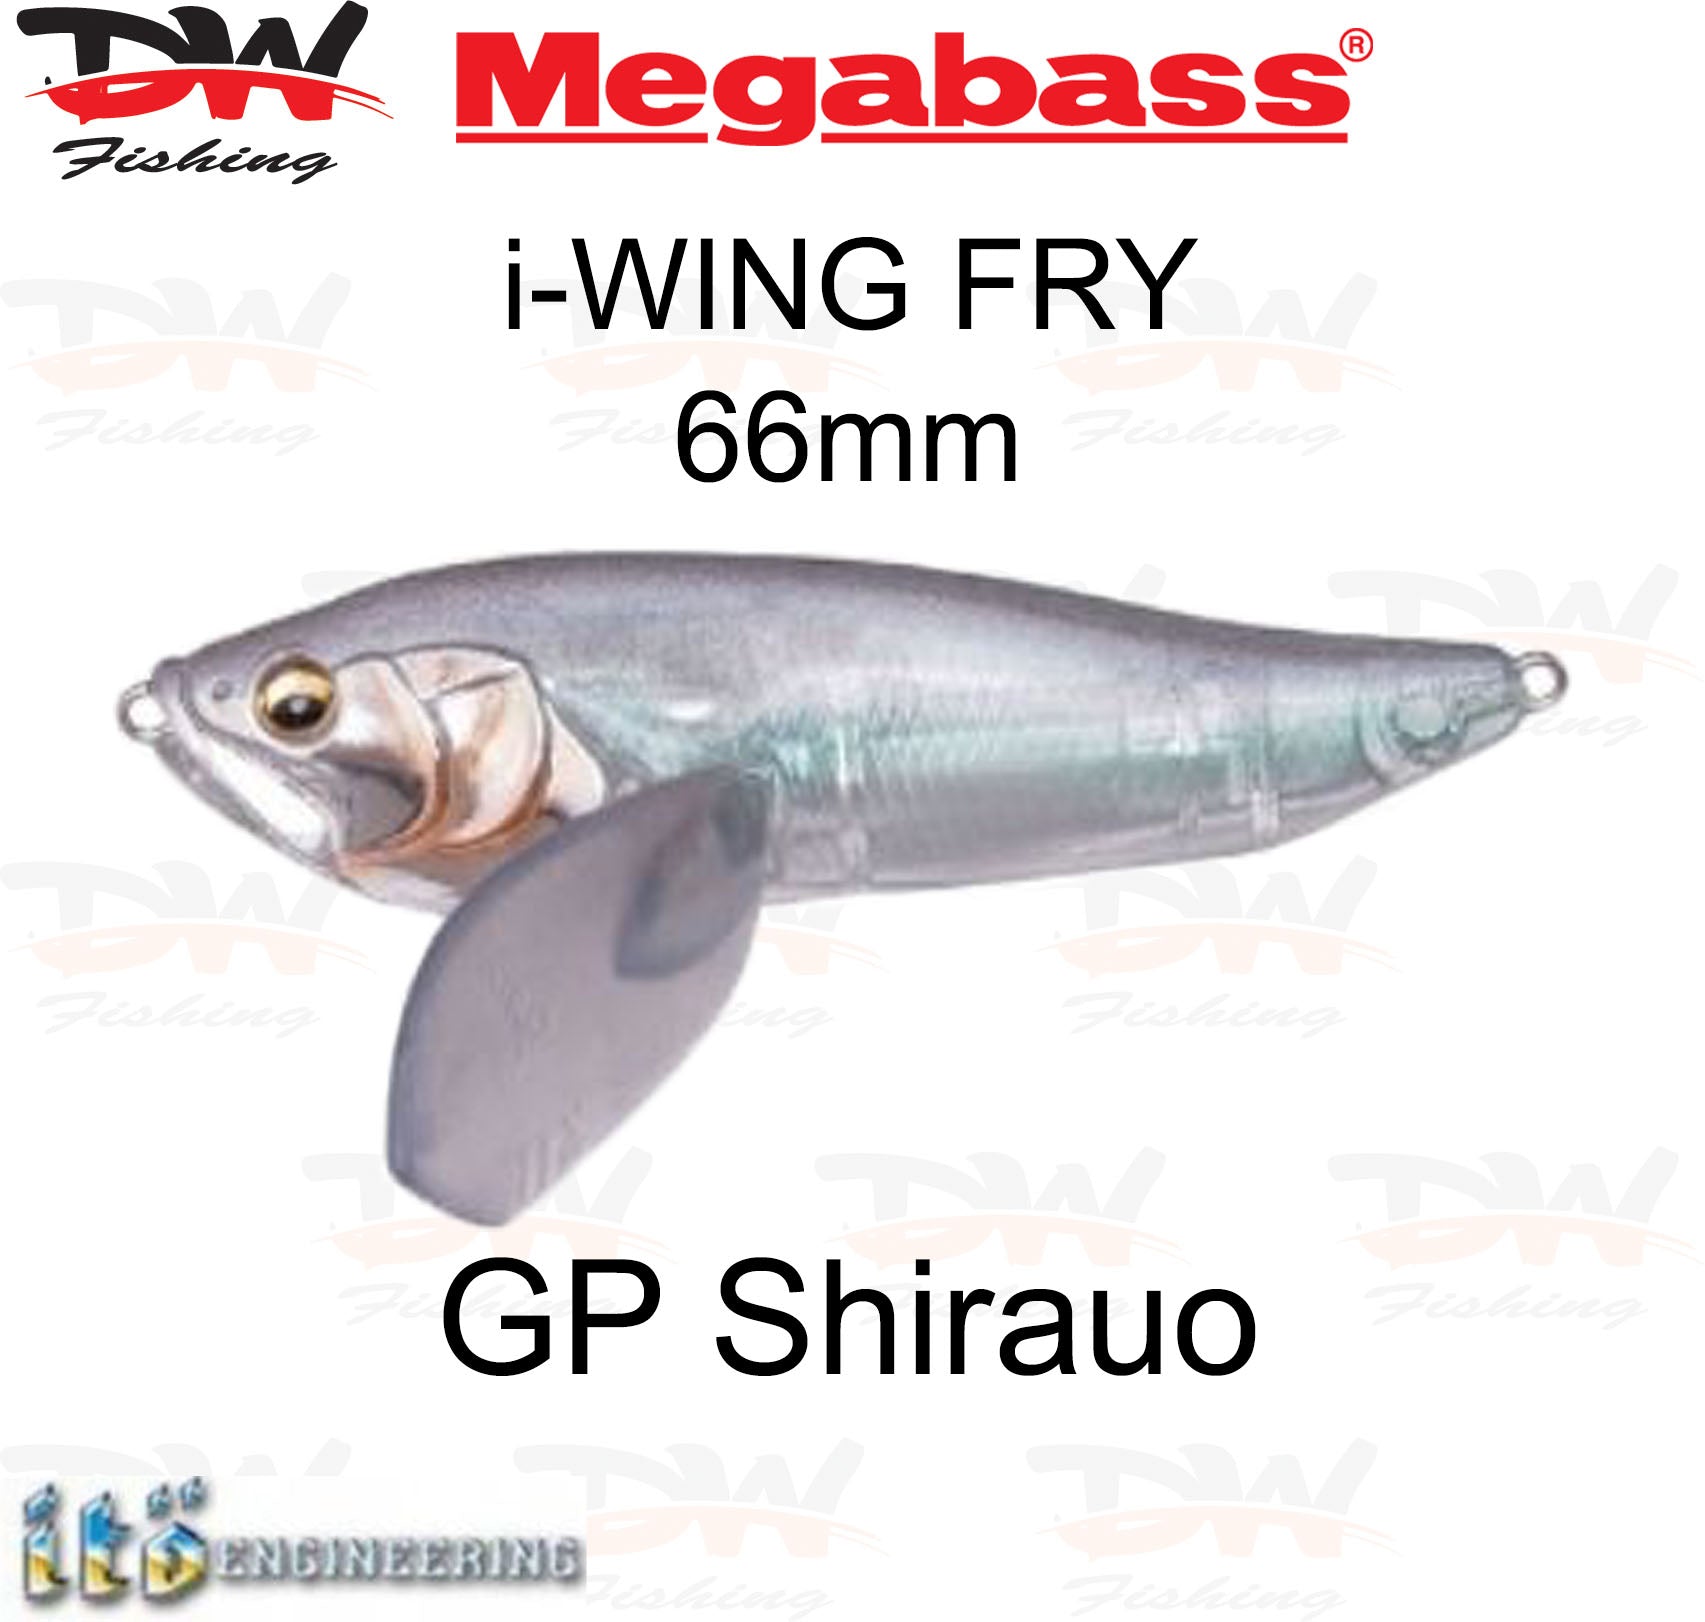 Megabass i-WING FRY surface lure single colour GP Shirauo